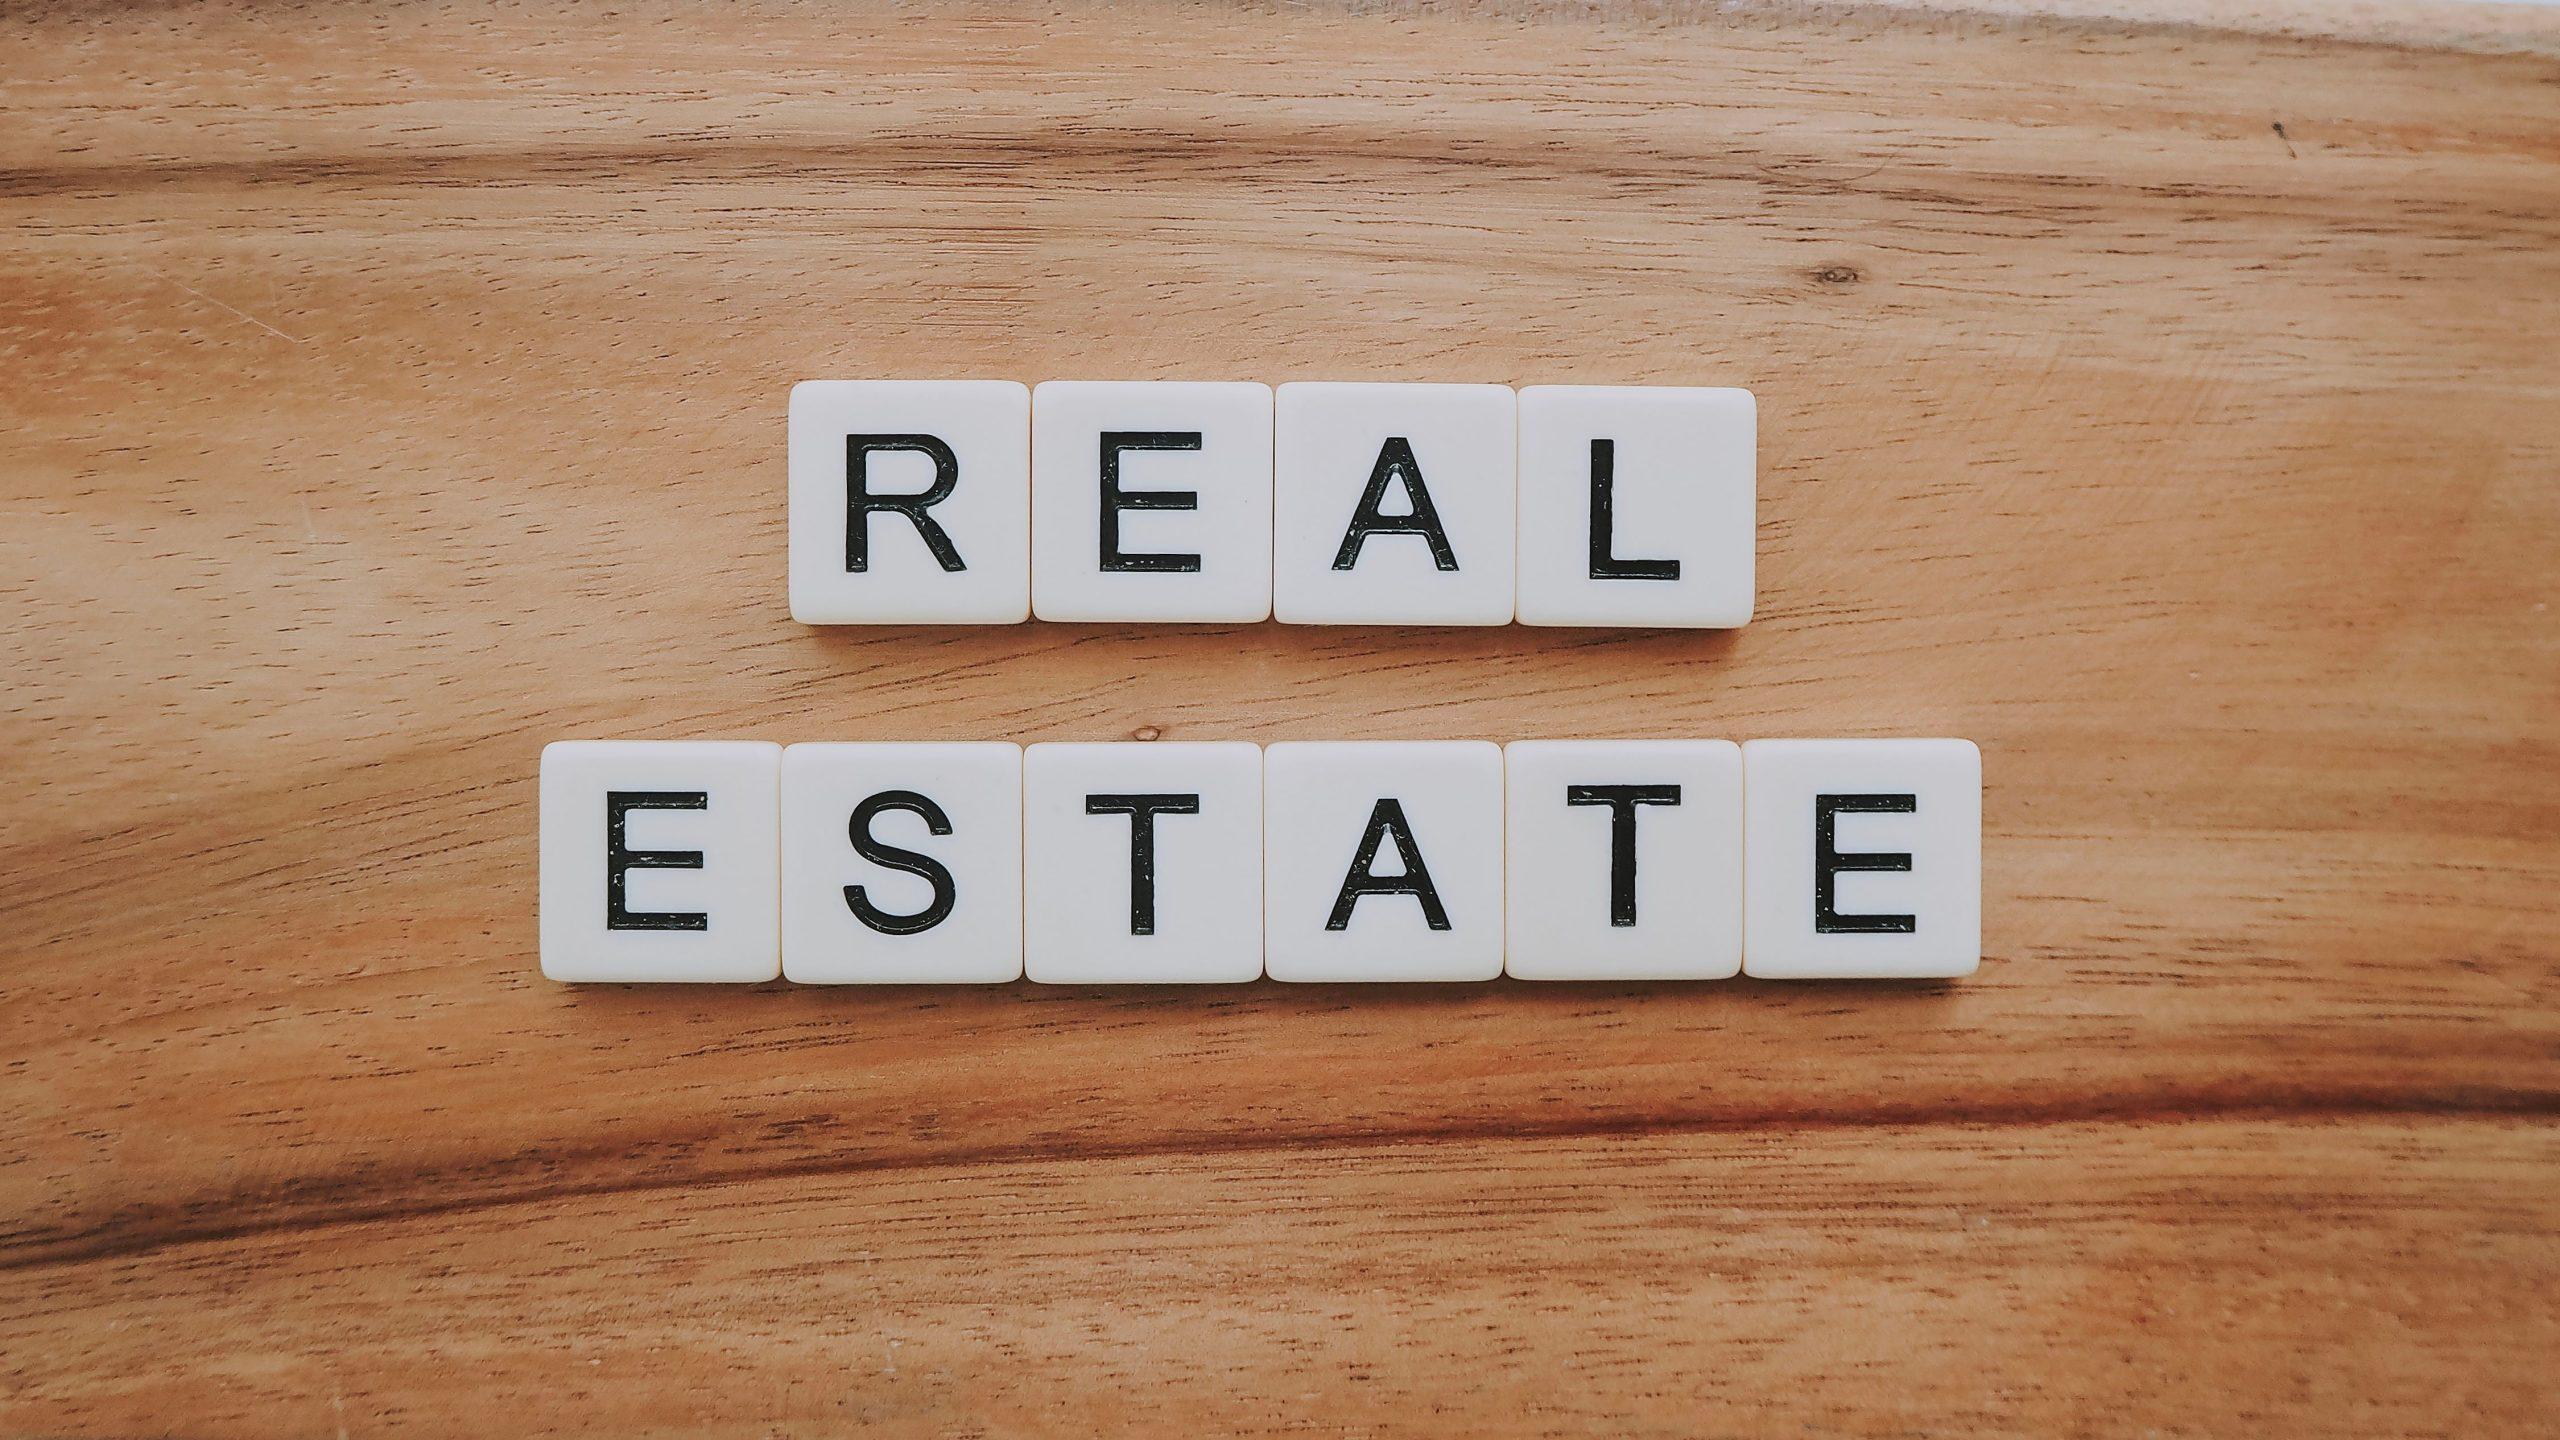 Scrabble-style letters arranged to spell the words 'real estate'.